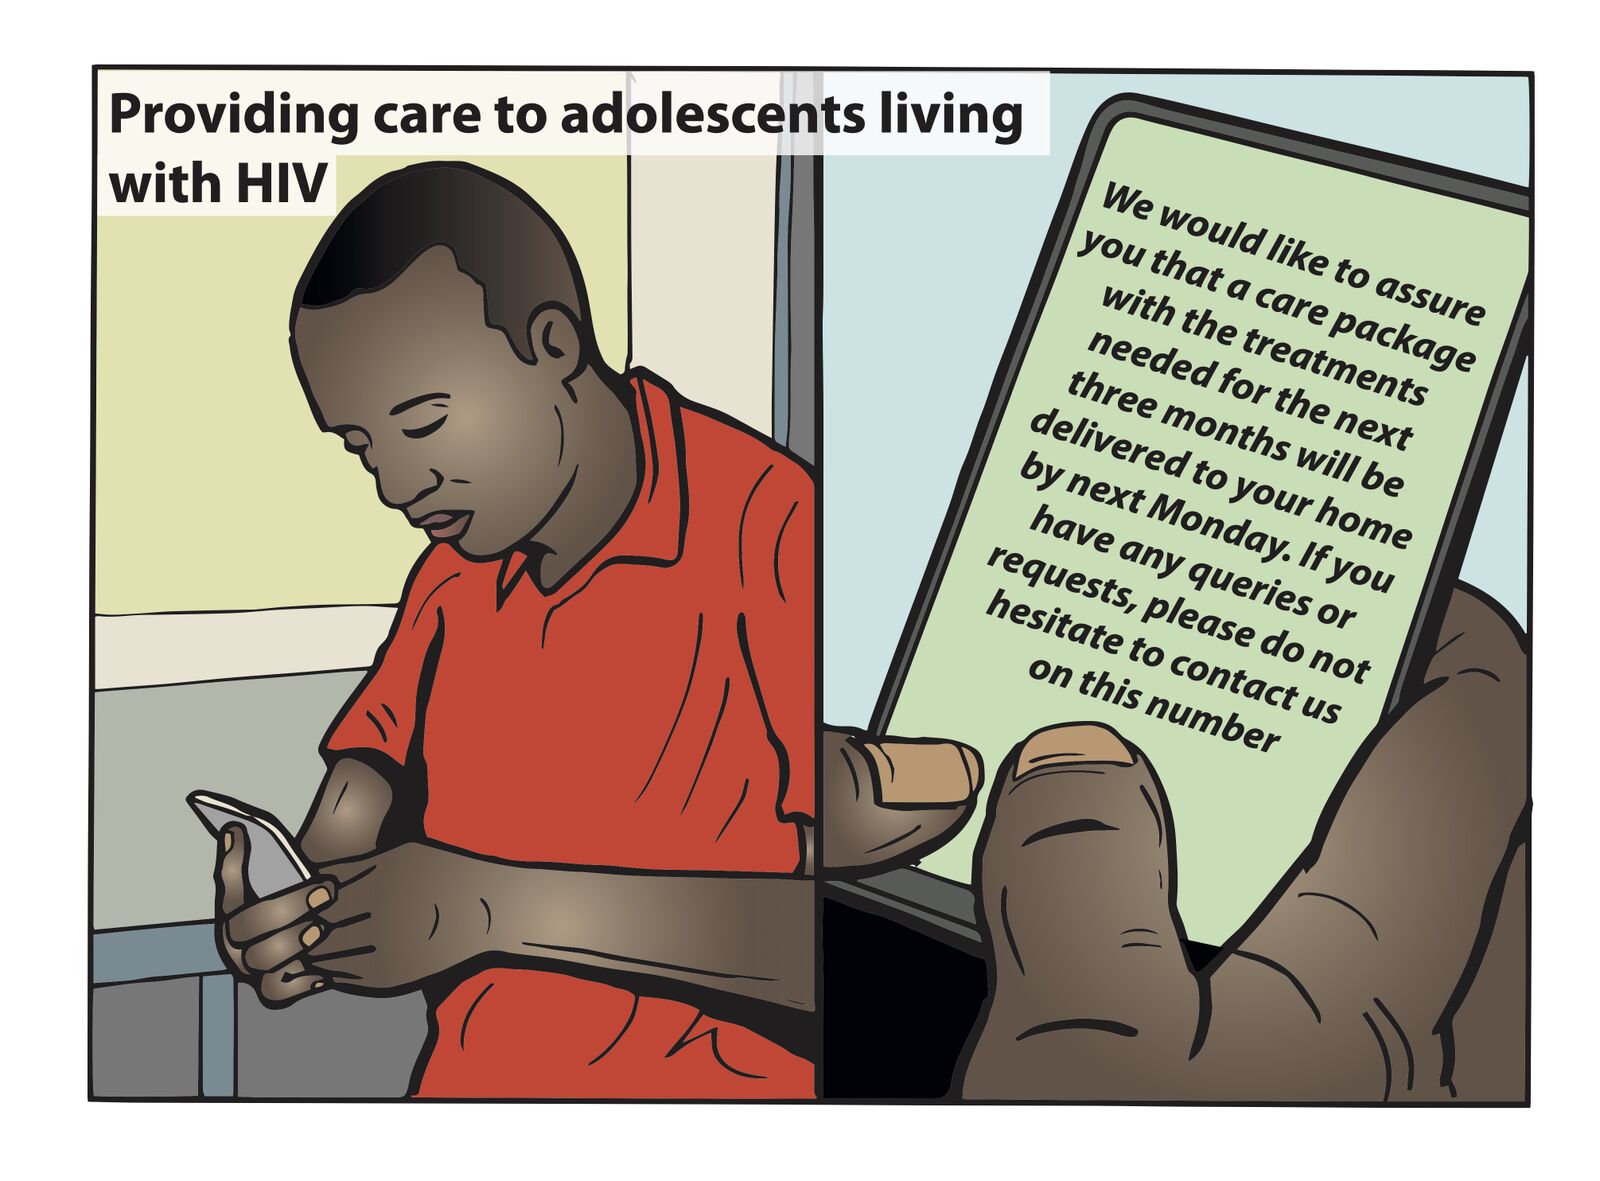 E) Adaptations to care provided to adolescents living with HIV